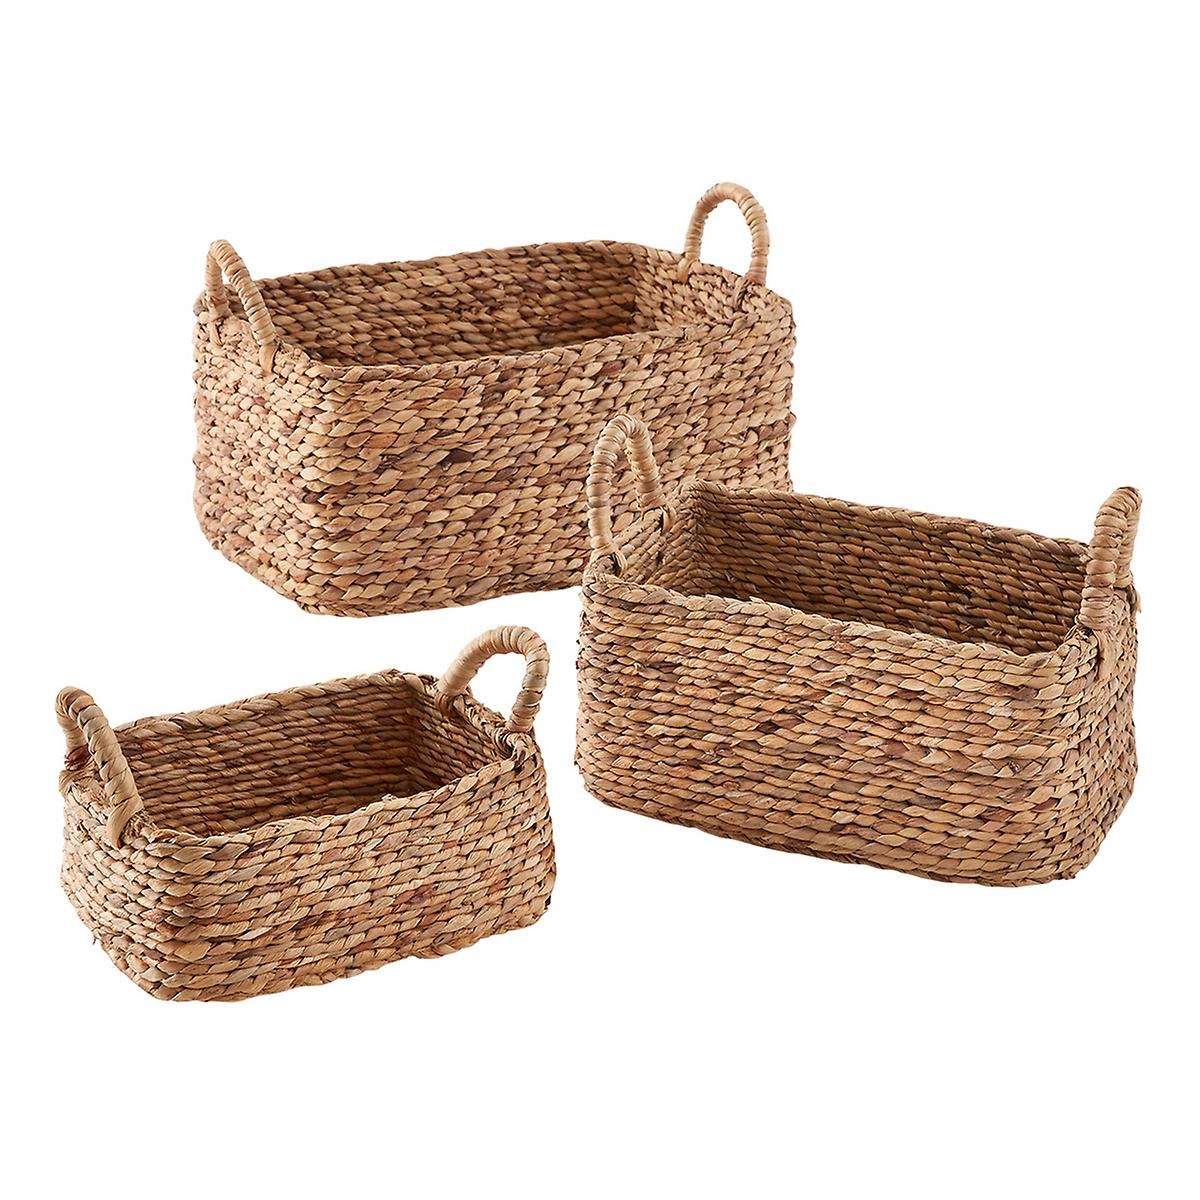 Water Hyacinth Braided Weave Bins | The Container Store